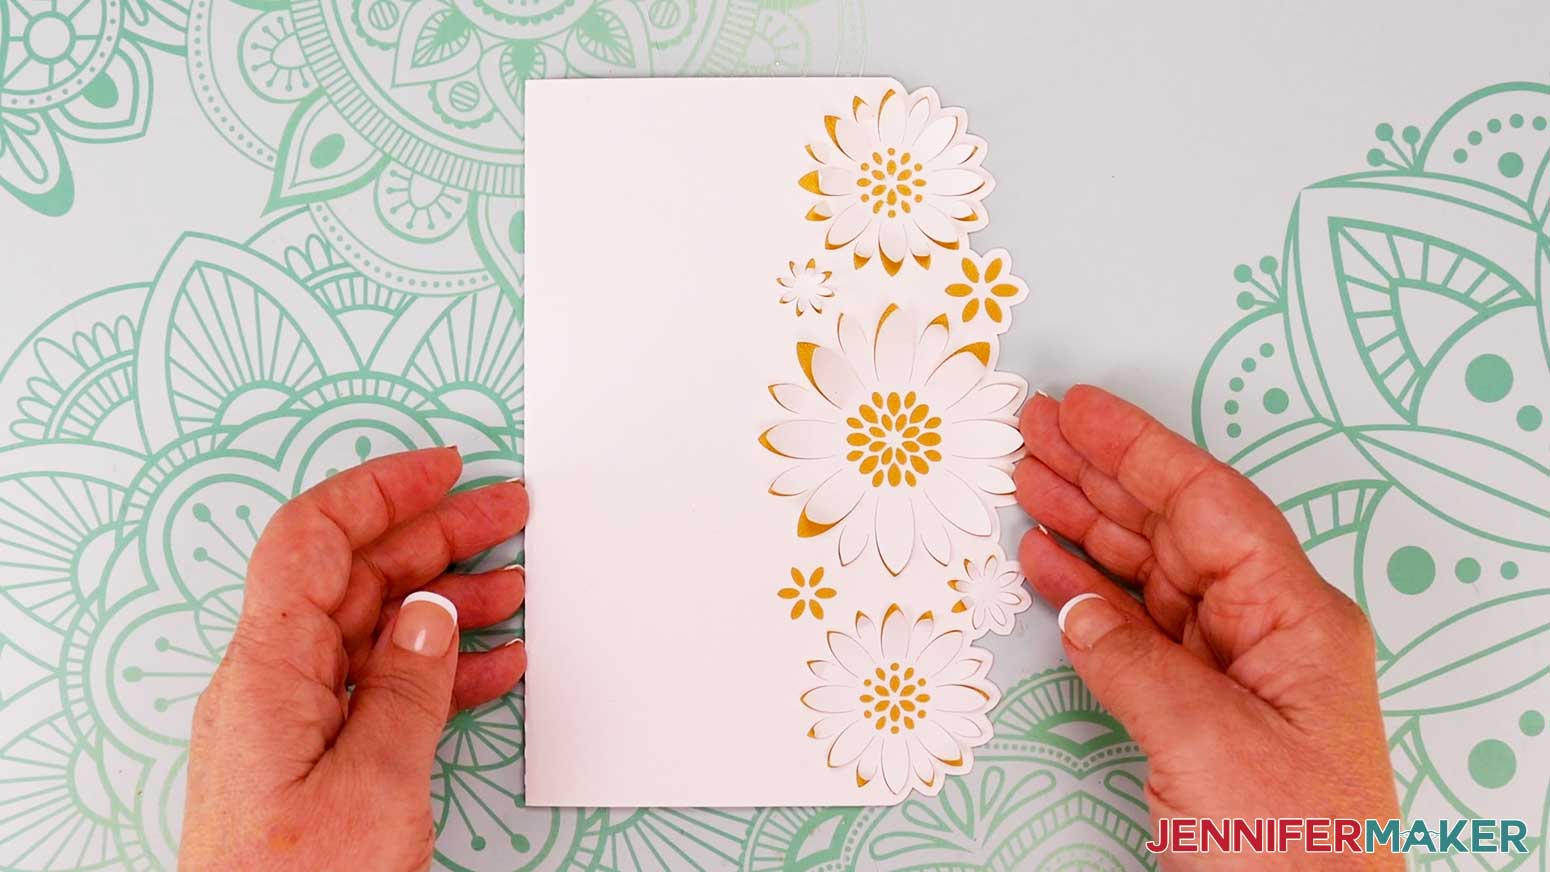 The finished Flower Shaped Edge Card with a white front and gold liner